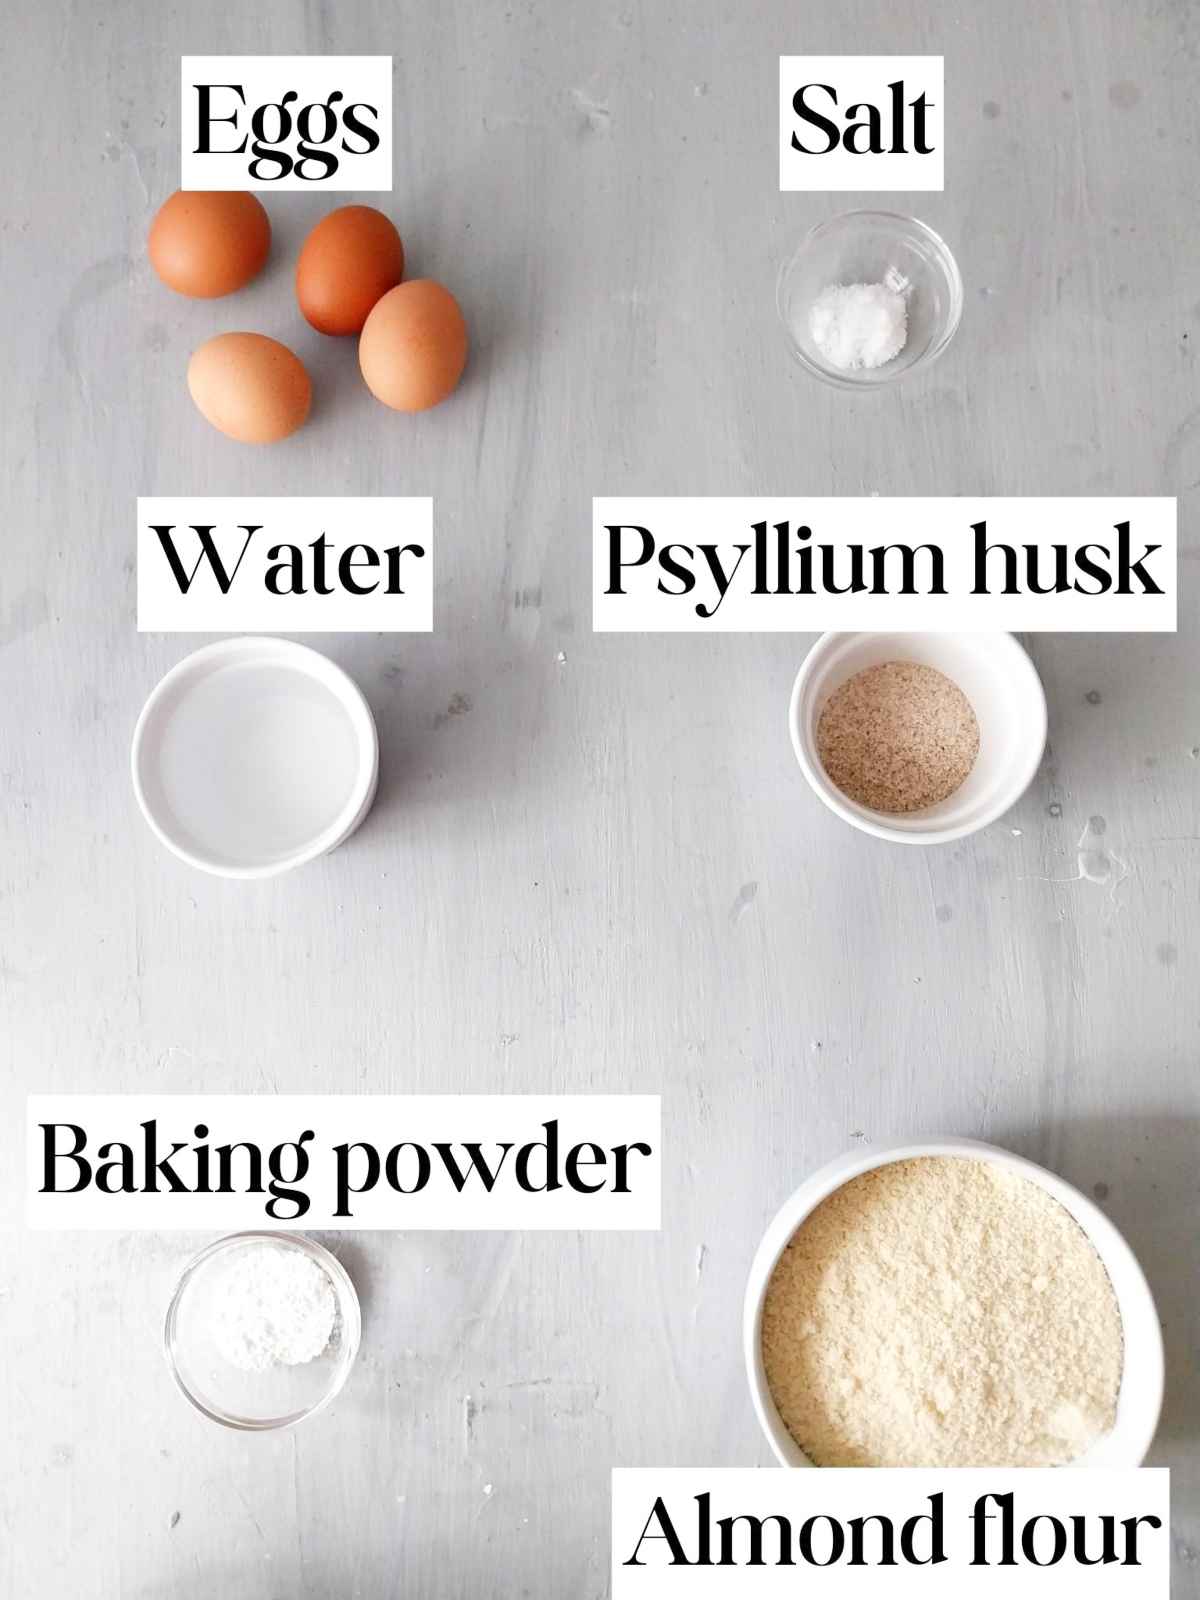 Ingredients in small bowls on a gray surface.